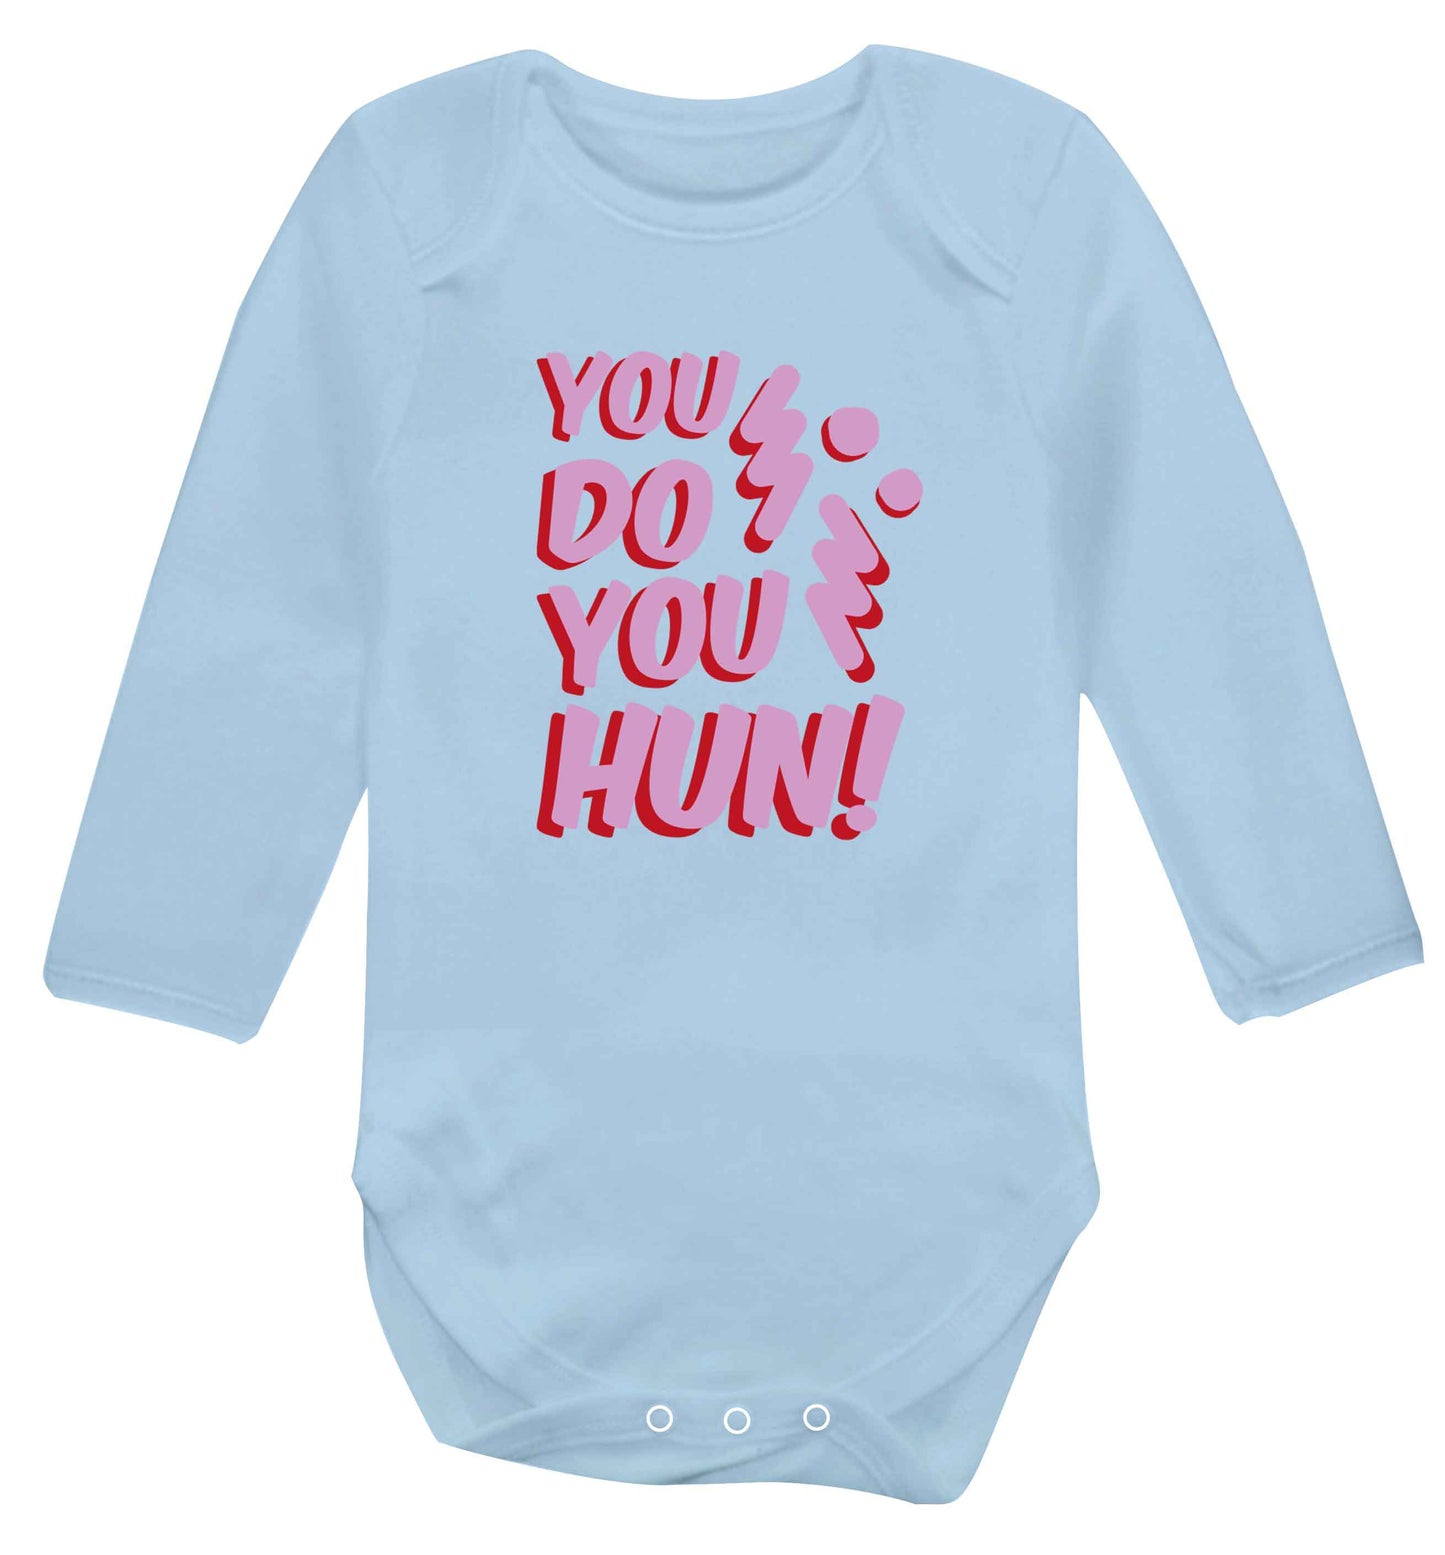 You do you hun baby vest long sleeved pale blue 6-12 months